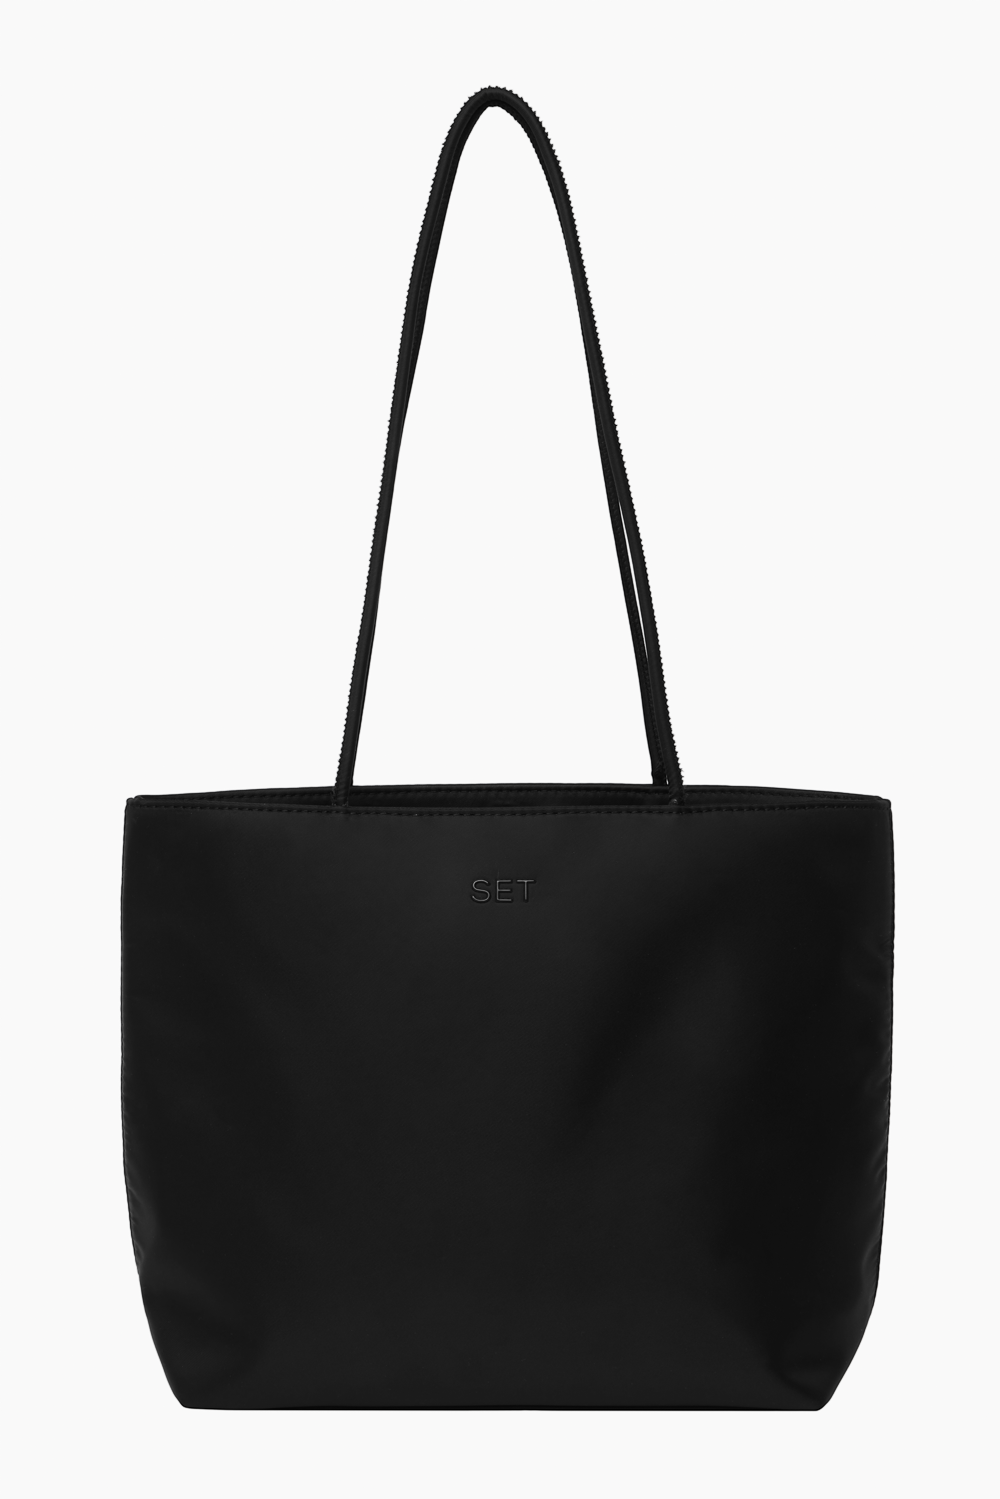 CITY TOTE - ONYX Featured Image